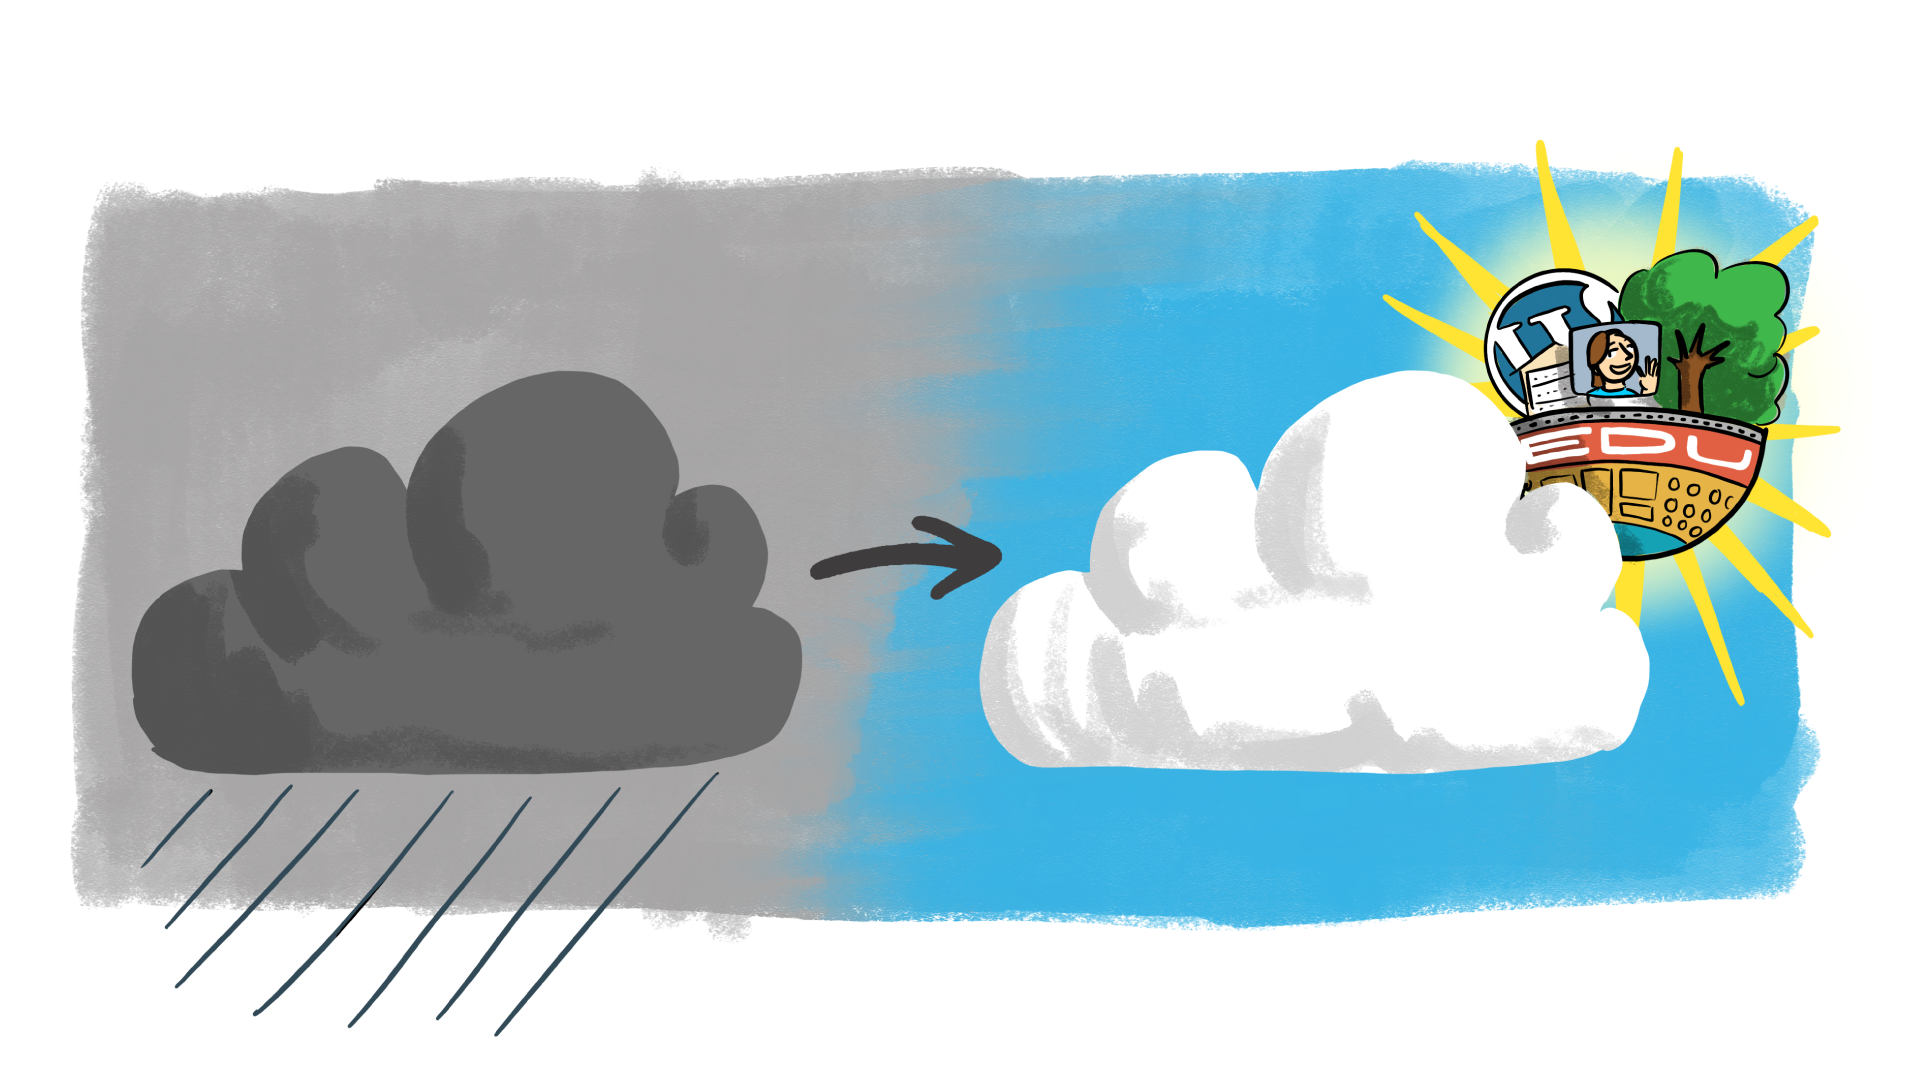 A grey stormcloud transitions to a puffy white cloud with a clear blue sky. The sun is a floating island with a campus on it labeled EDU.